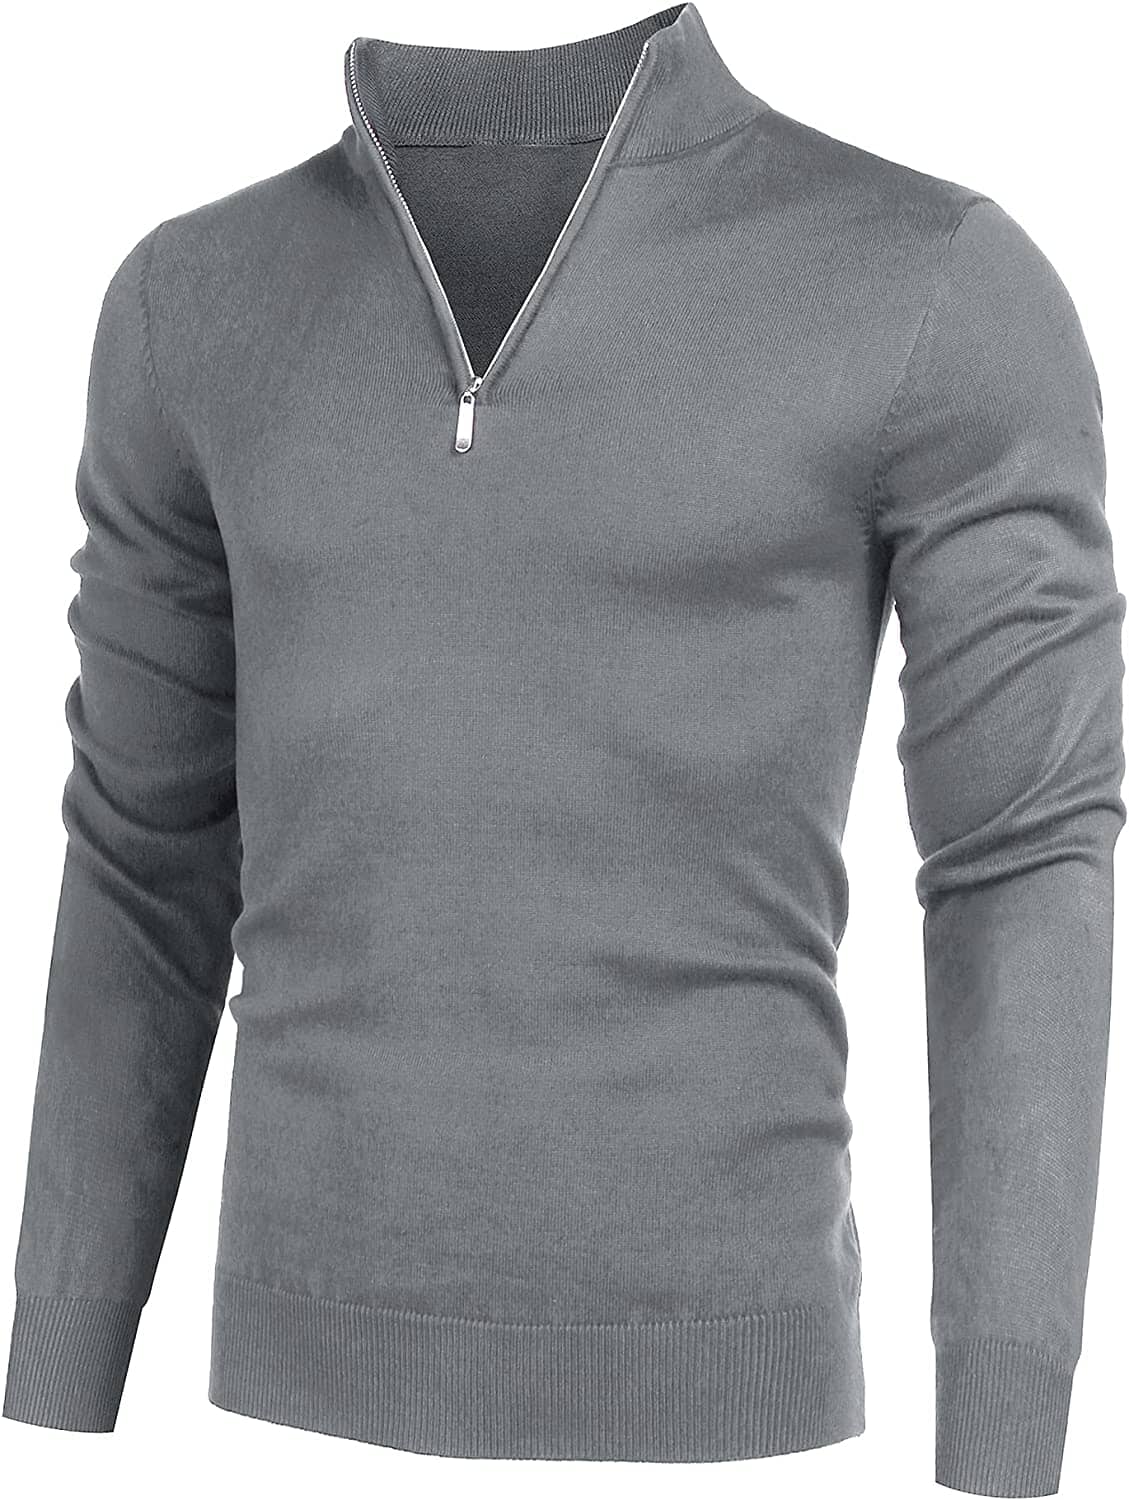 Zip Up Slim Fit Lightweight Pullover Polo Sweater (US Only) Fashion Hoodies & Sweatshirts COOFANDY Store Grey S 